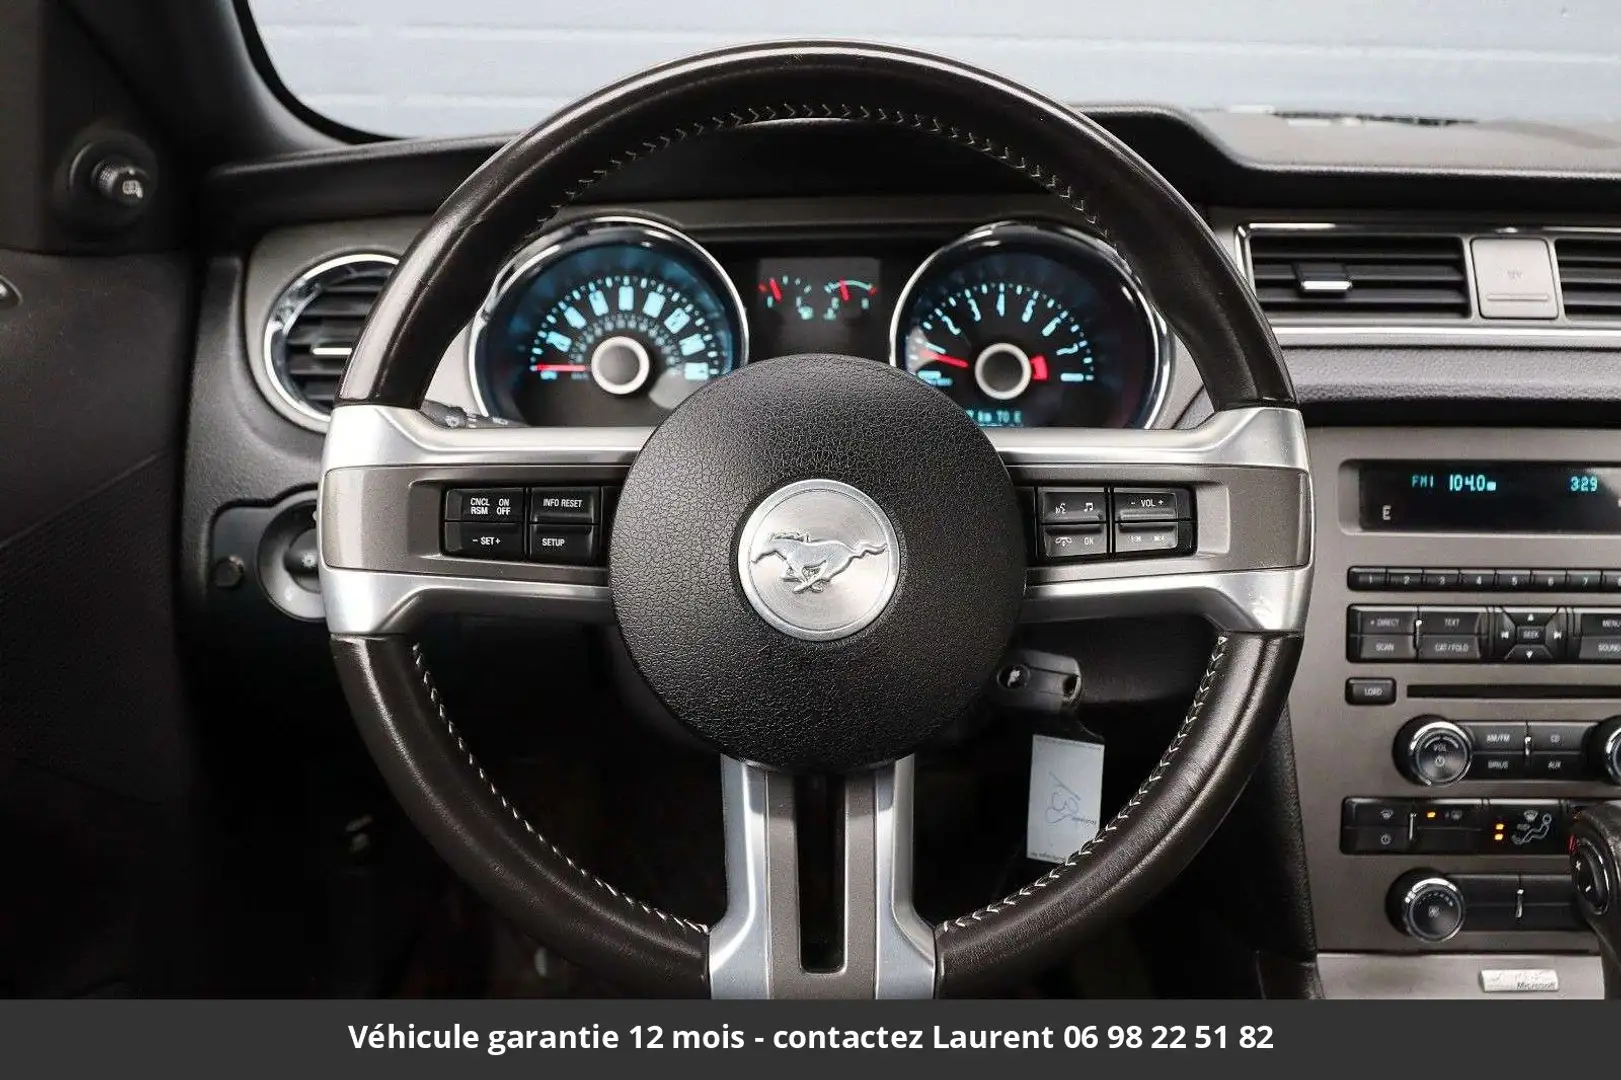 Ford Mustang 3.7 Coupé R19 Hors homologation 4500e siva - 2